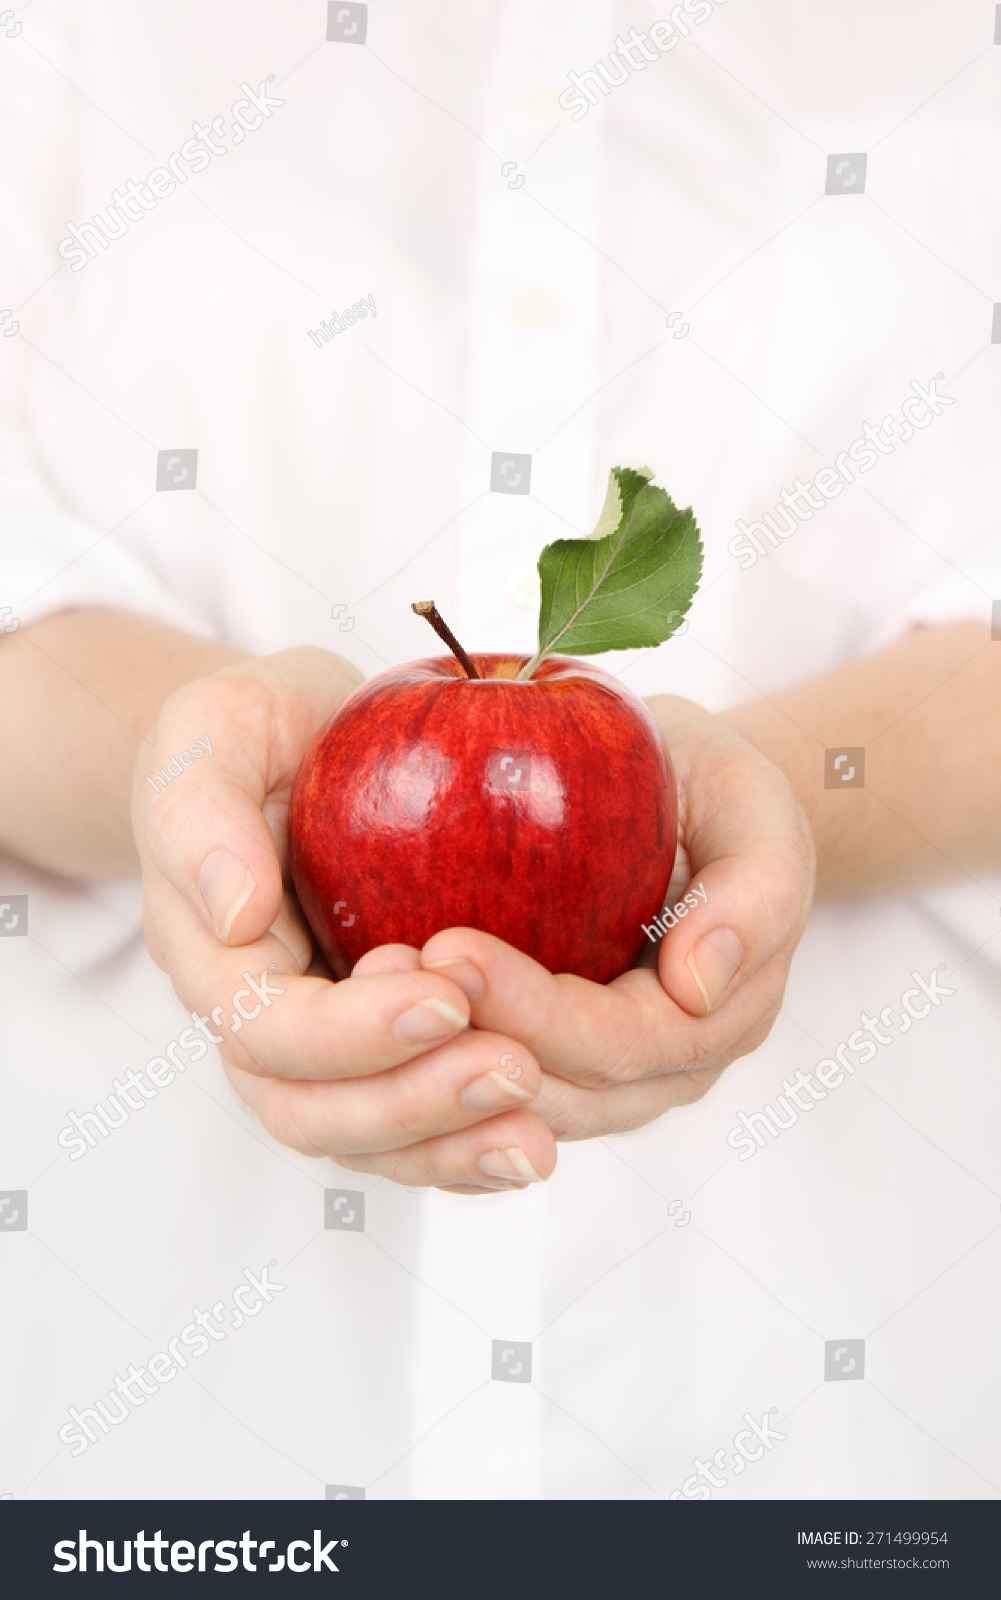 Delicious Apple cupped in hands #271499954